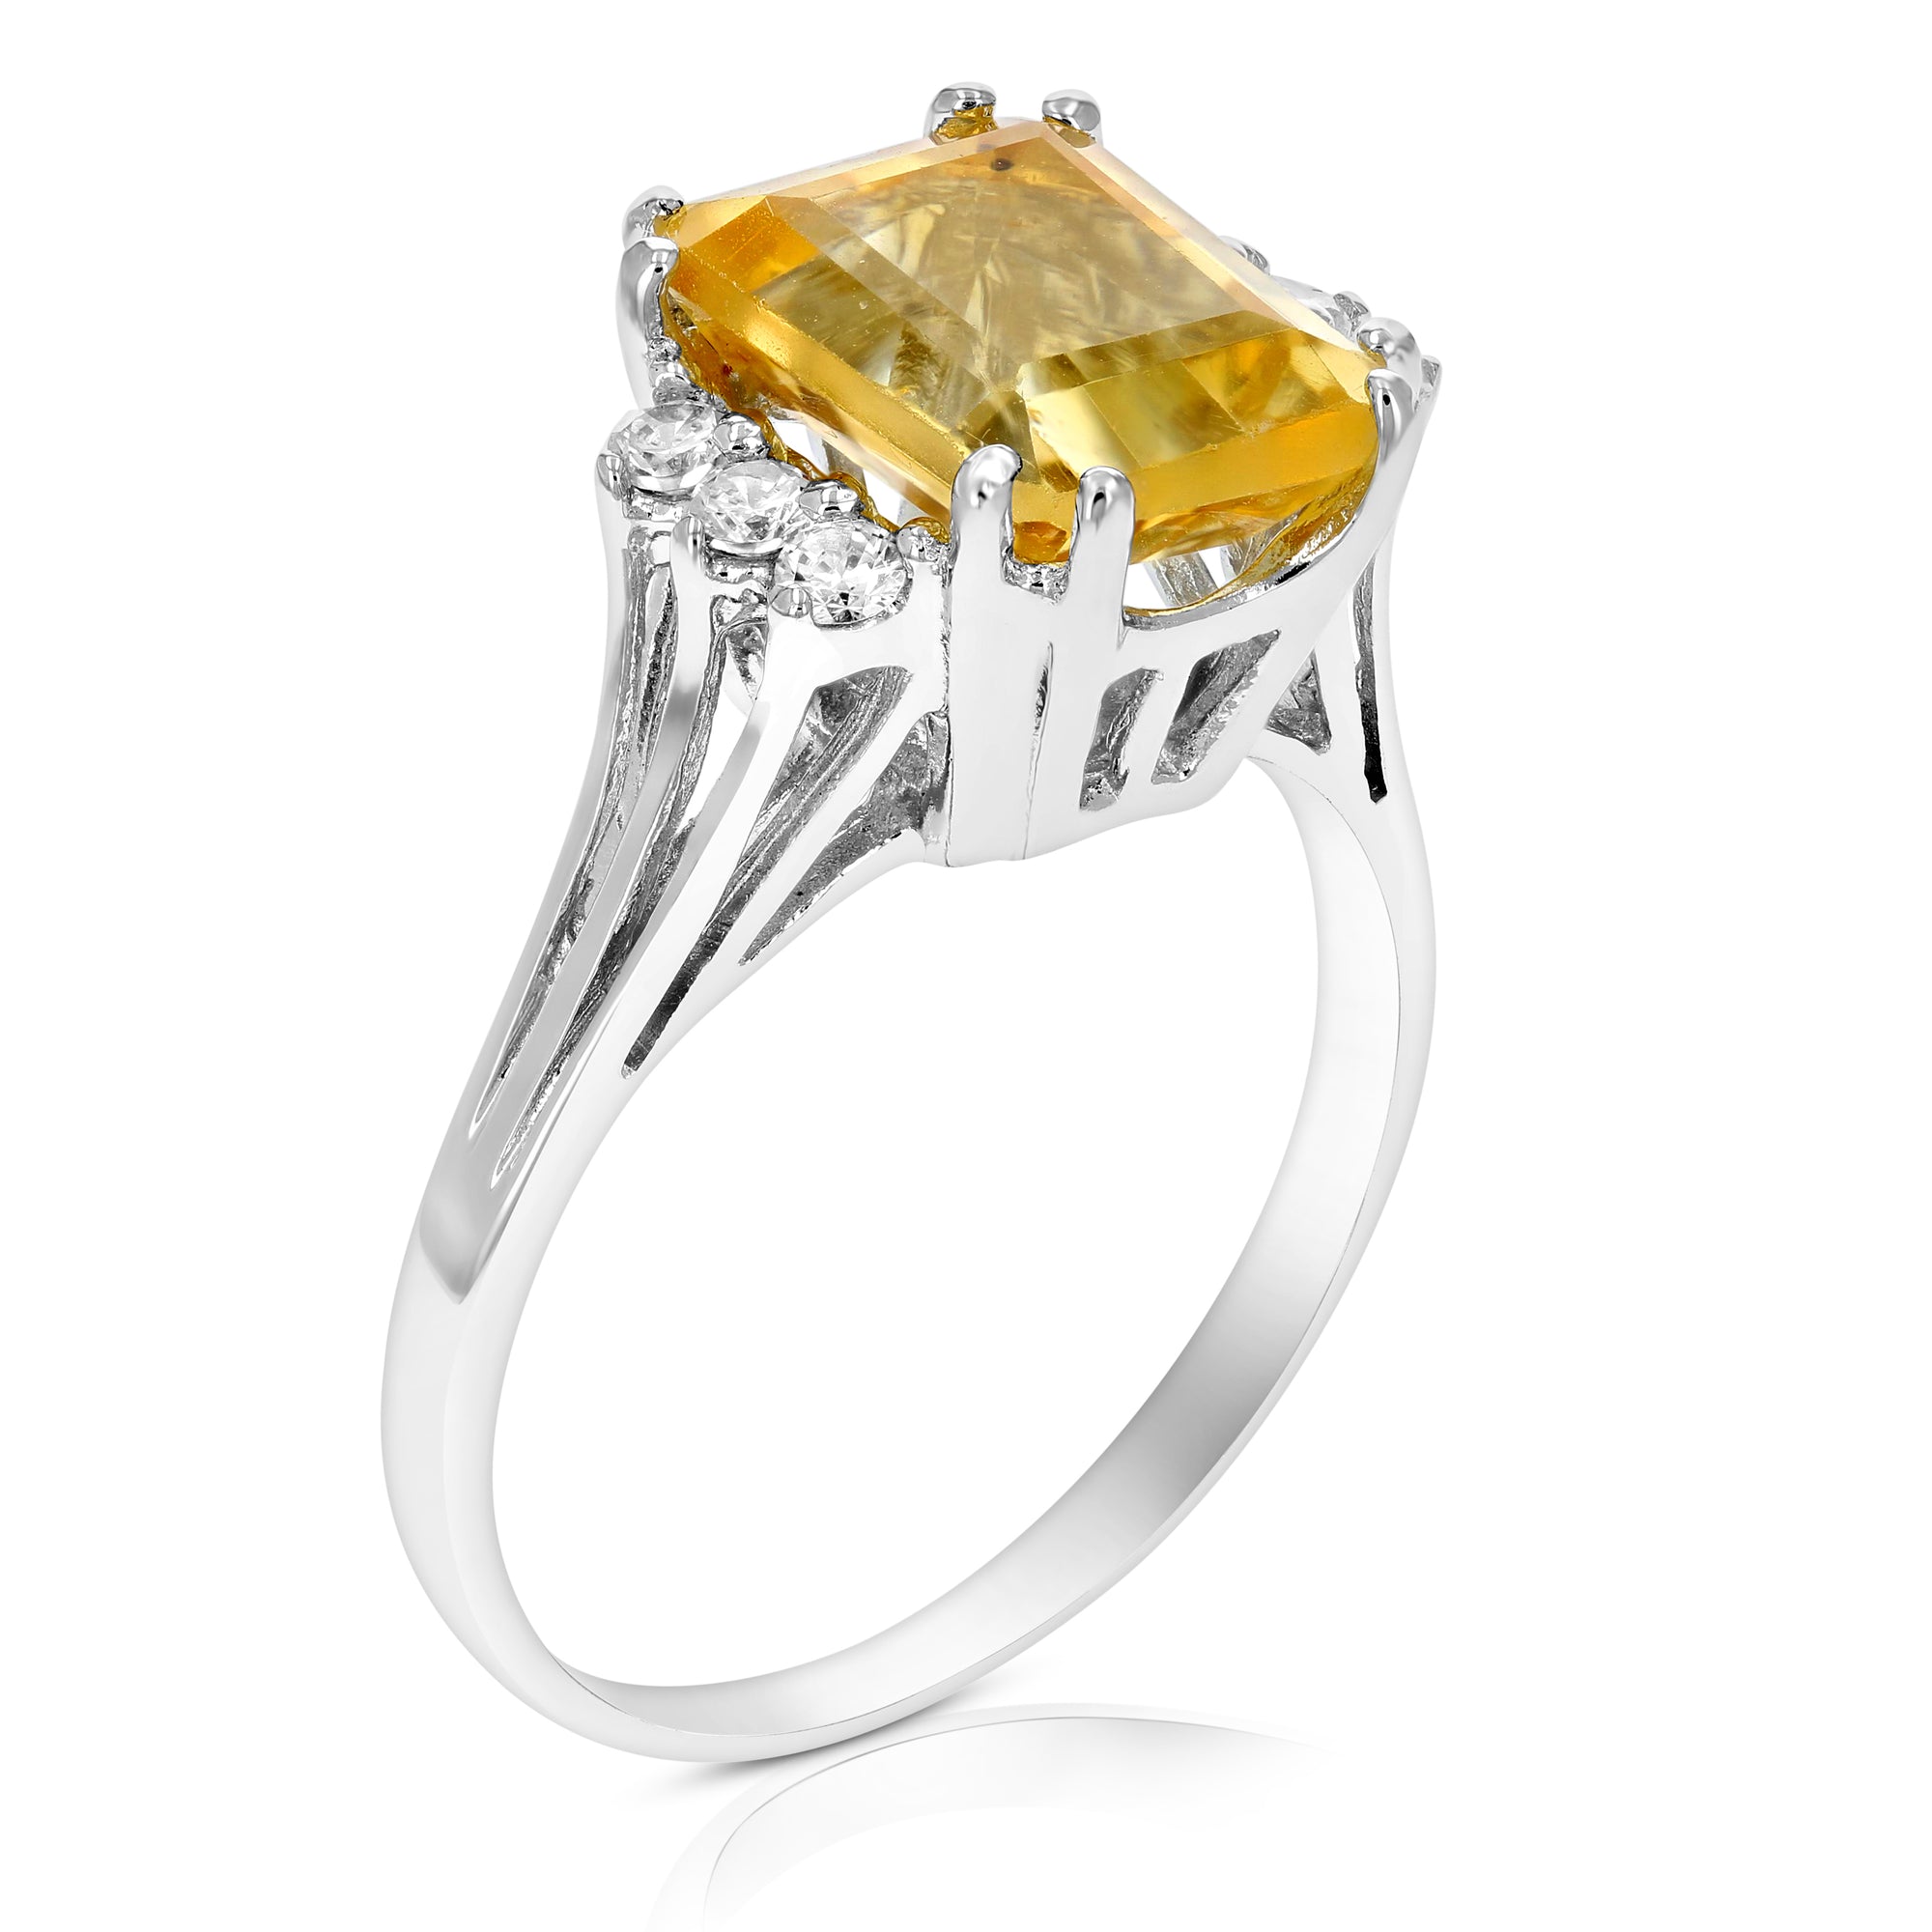 2.80 cttw Citrine Ring .925 Sterling Silver with Rhodium Emerald Shape 10x8 MM